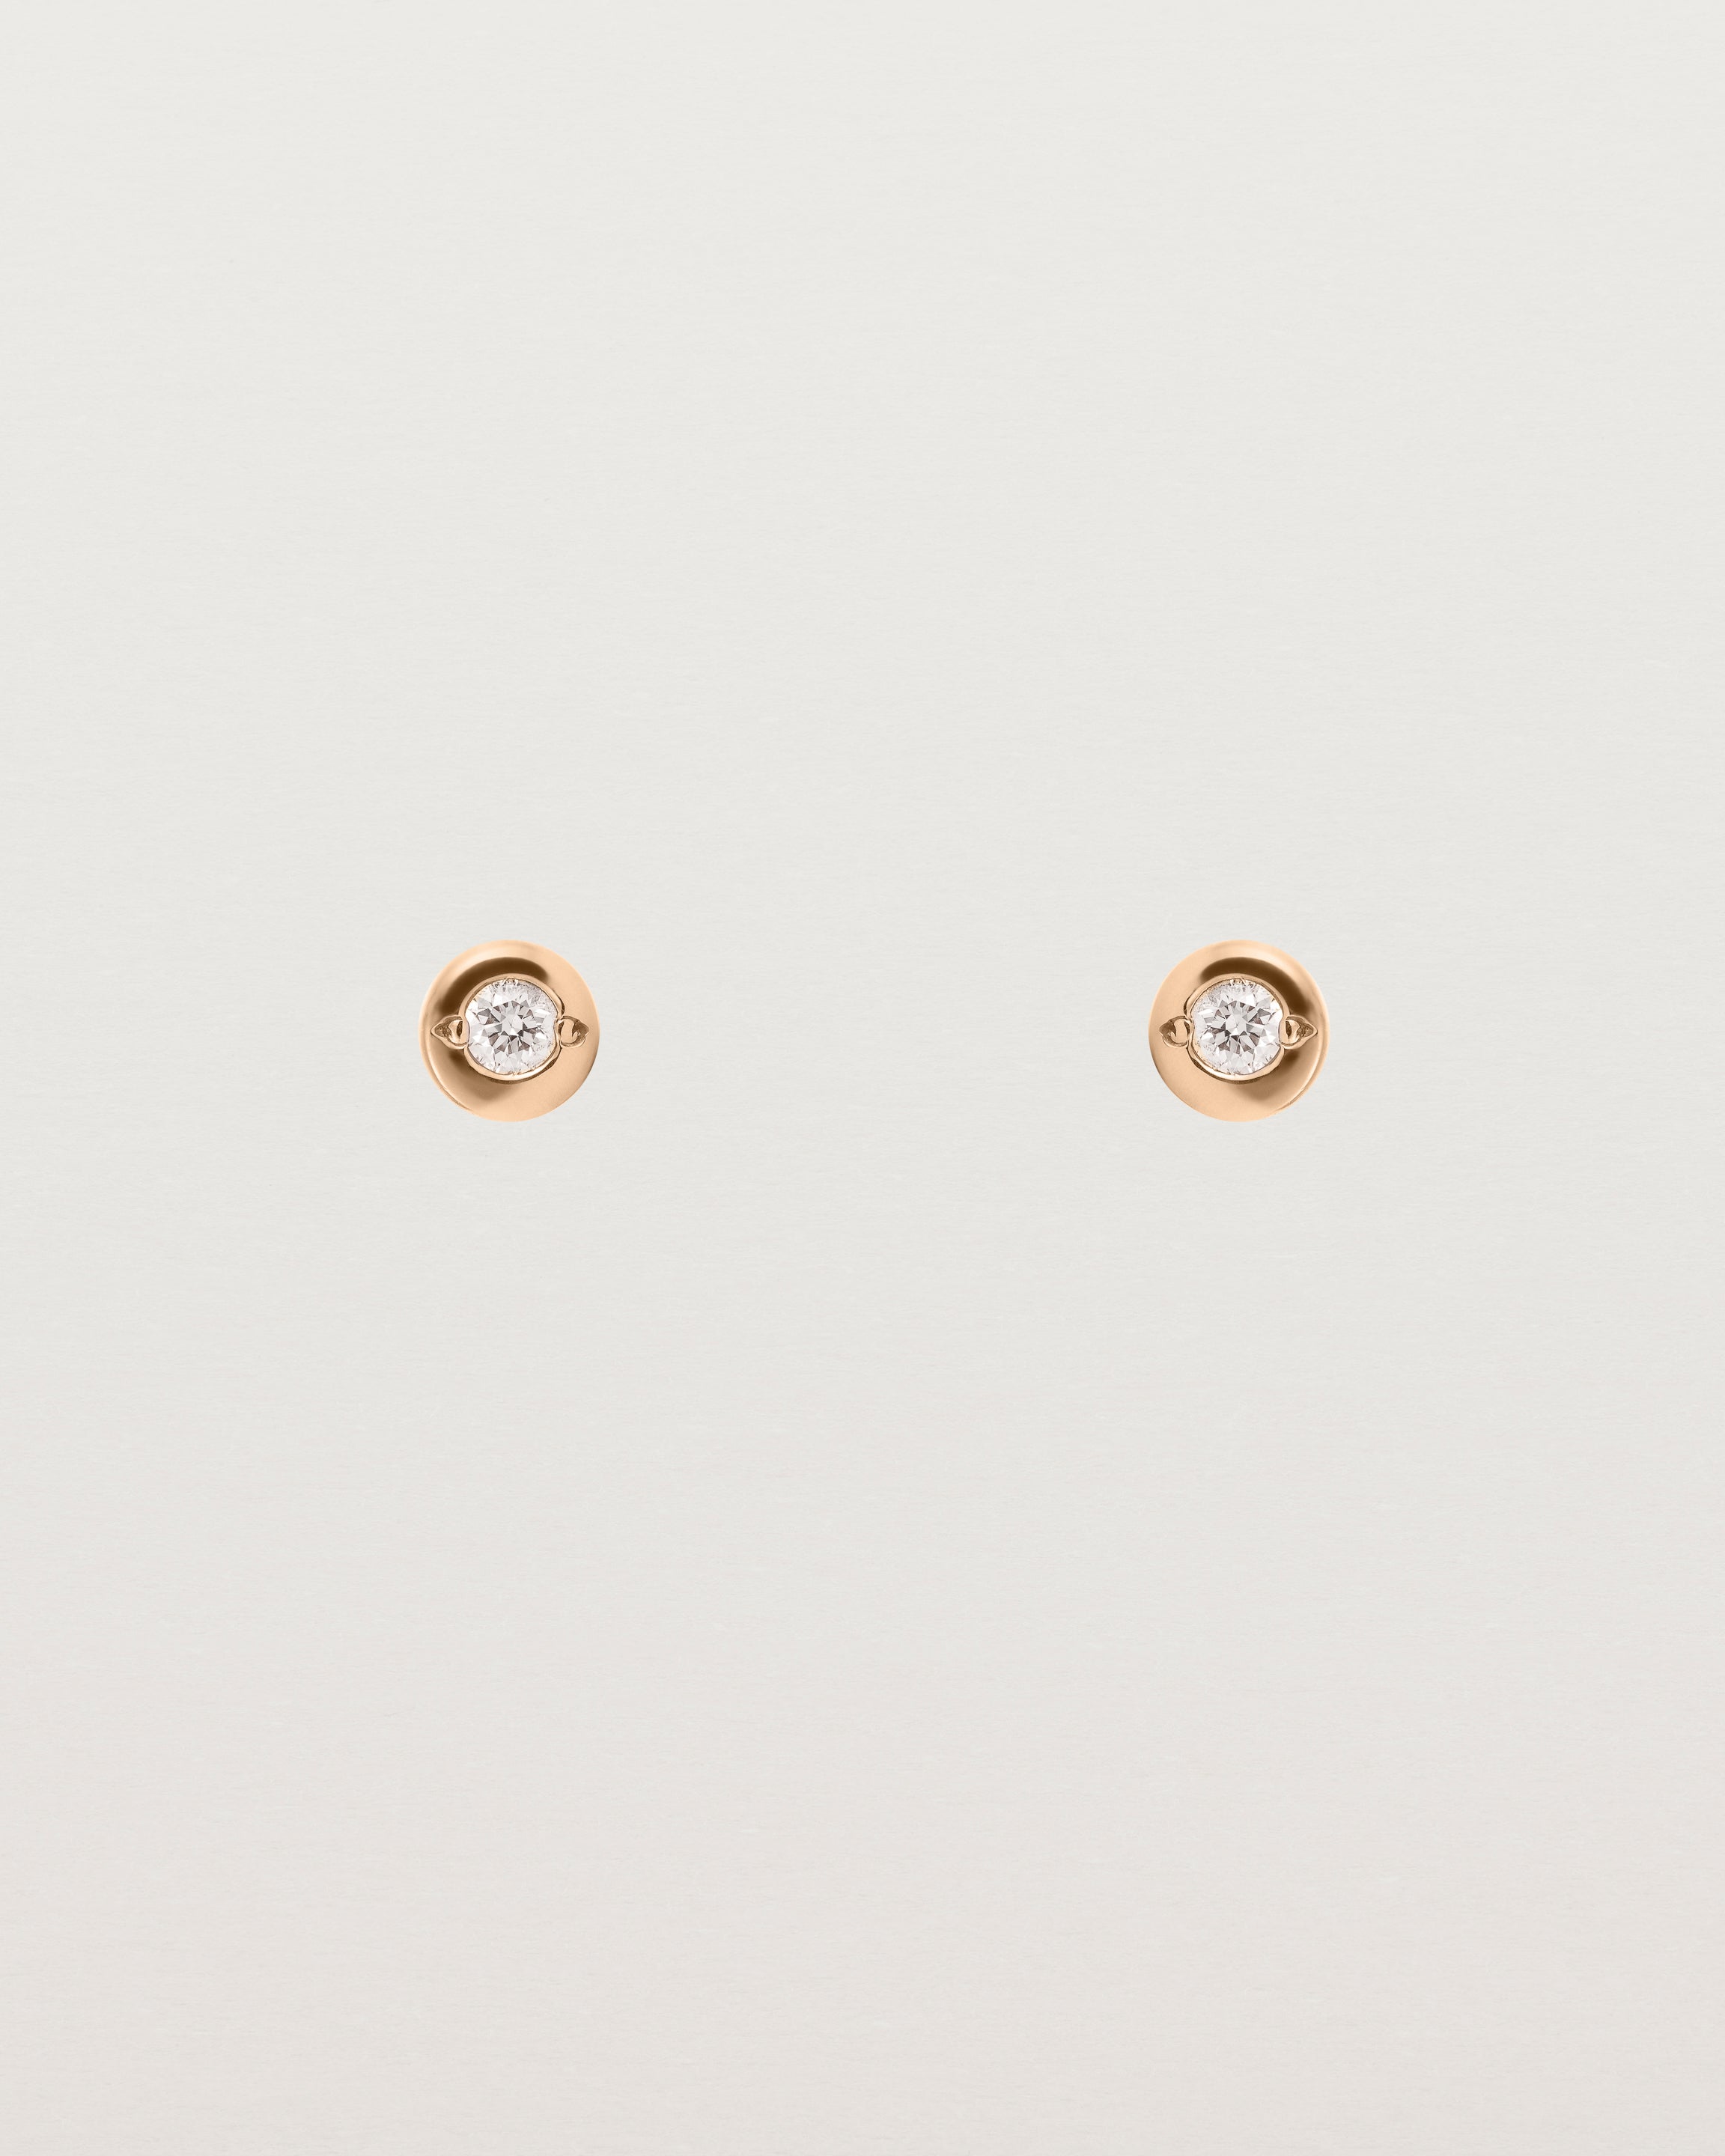 A small white circular rose gold stud featuring a white diamond